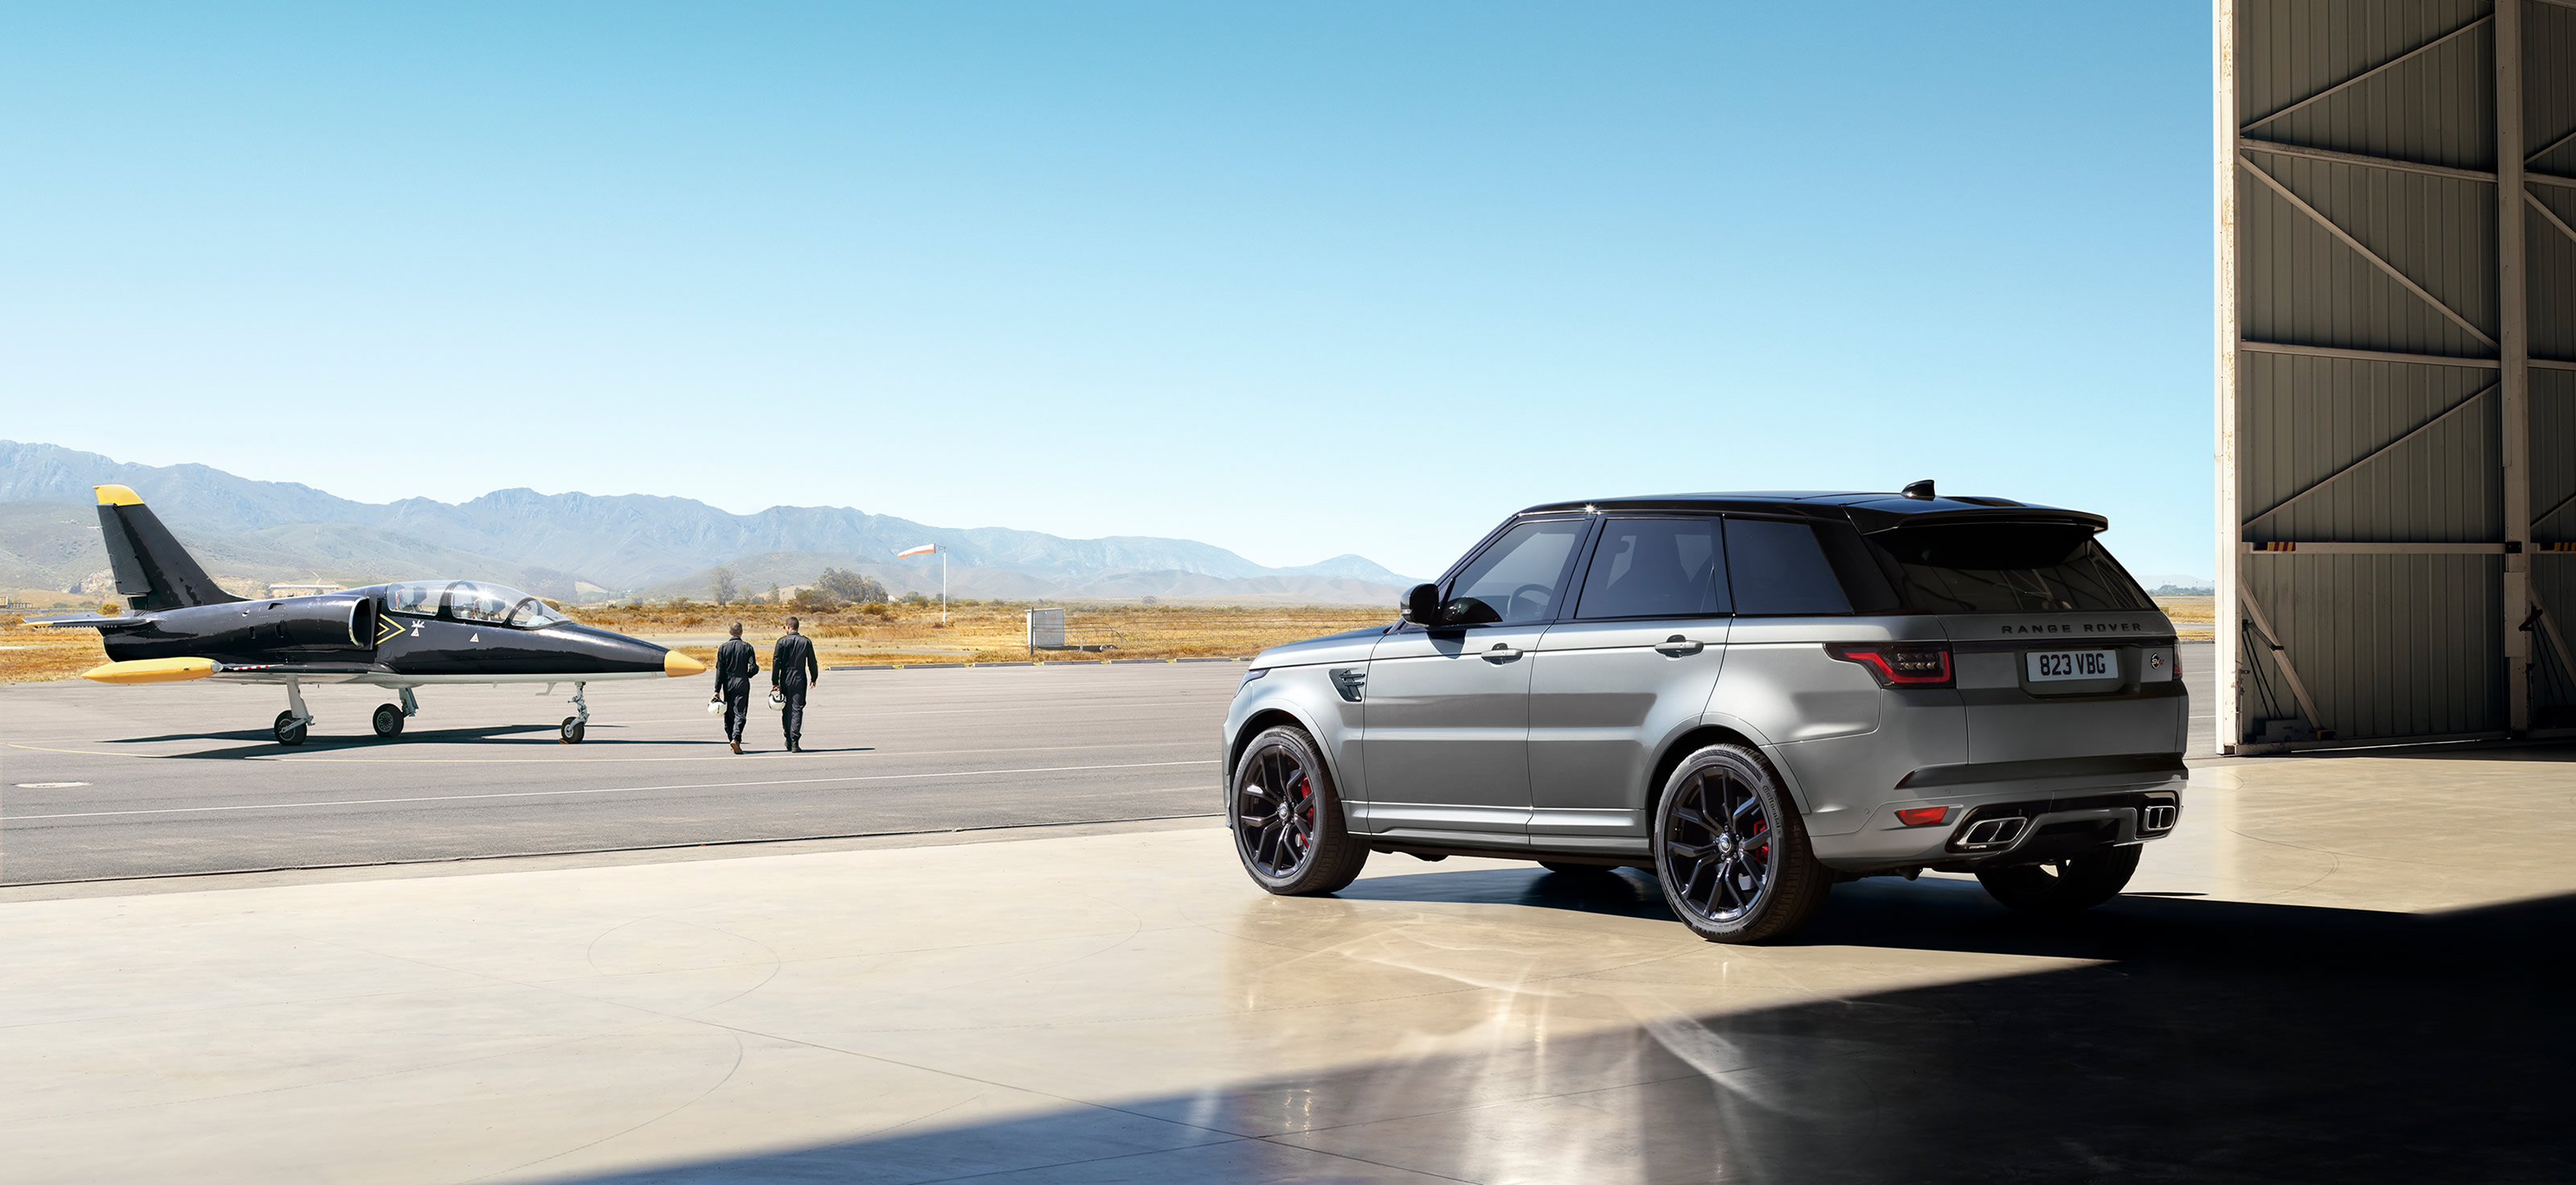 Trigger Shoots Range Rover Sport South Africa photoshoot